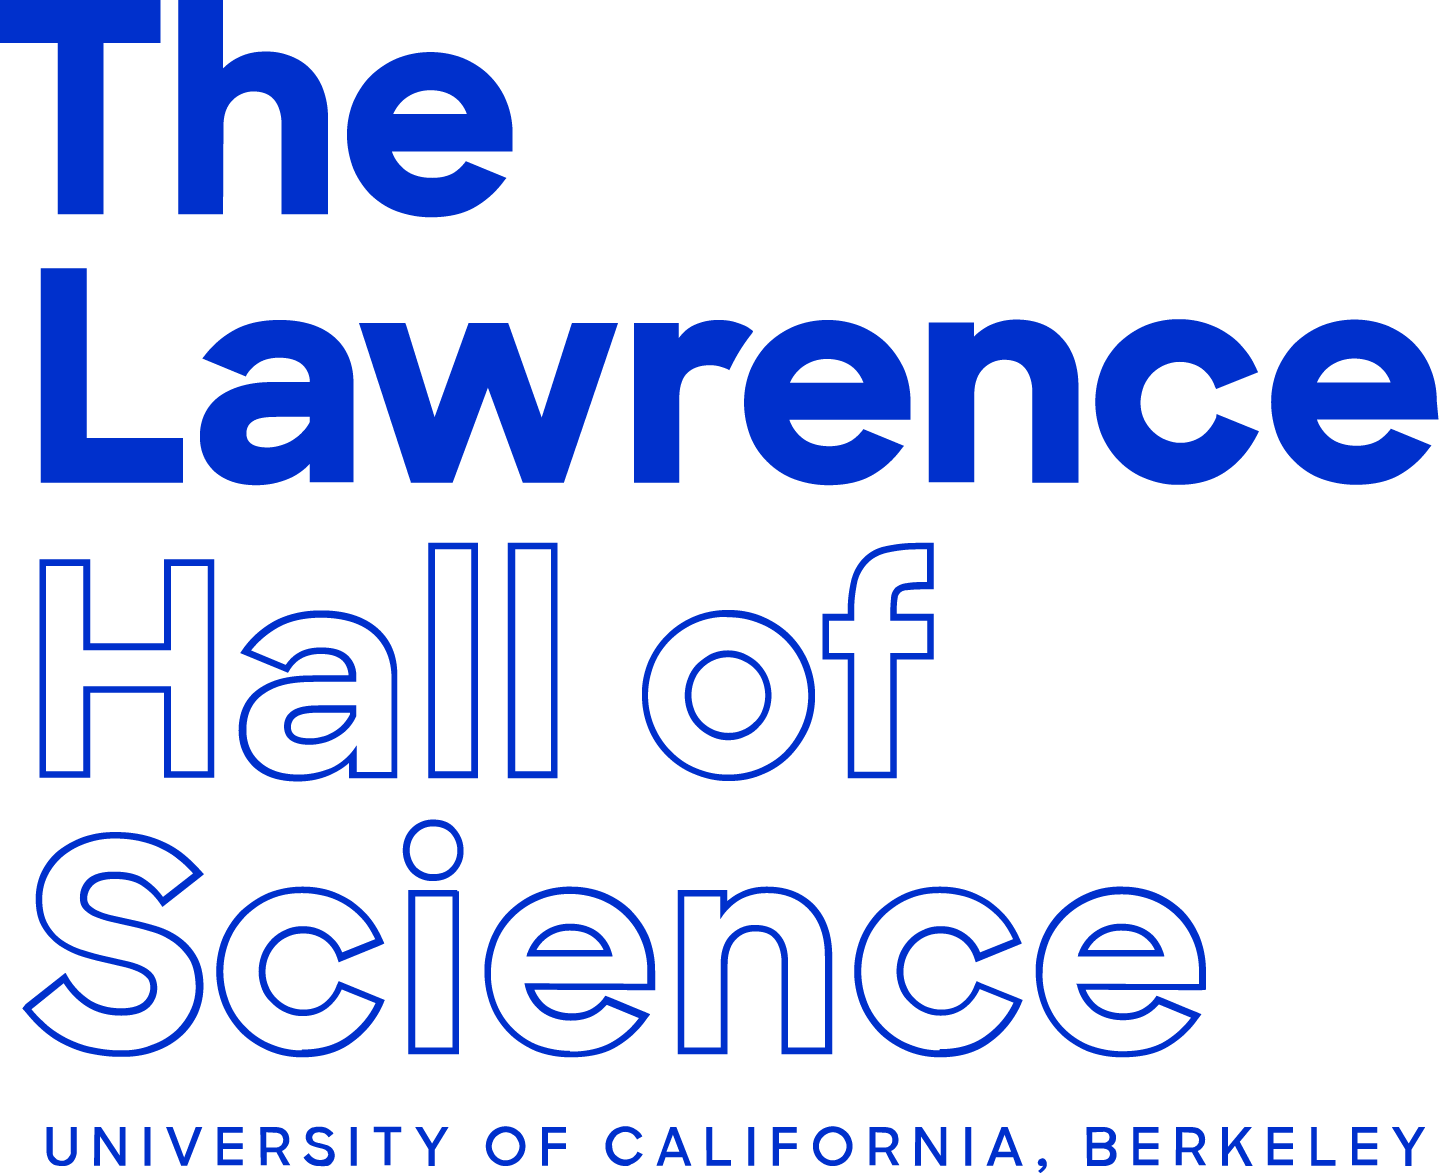 The Lawrence Hall of Science University of California Berkeley